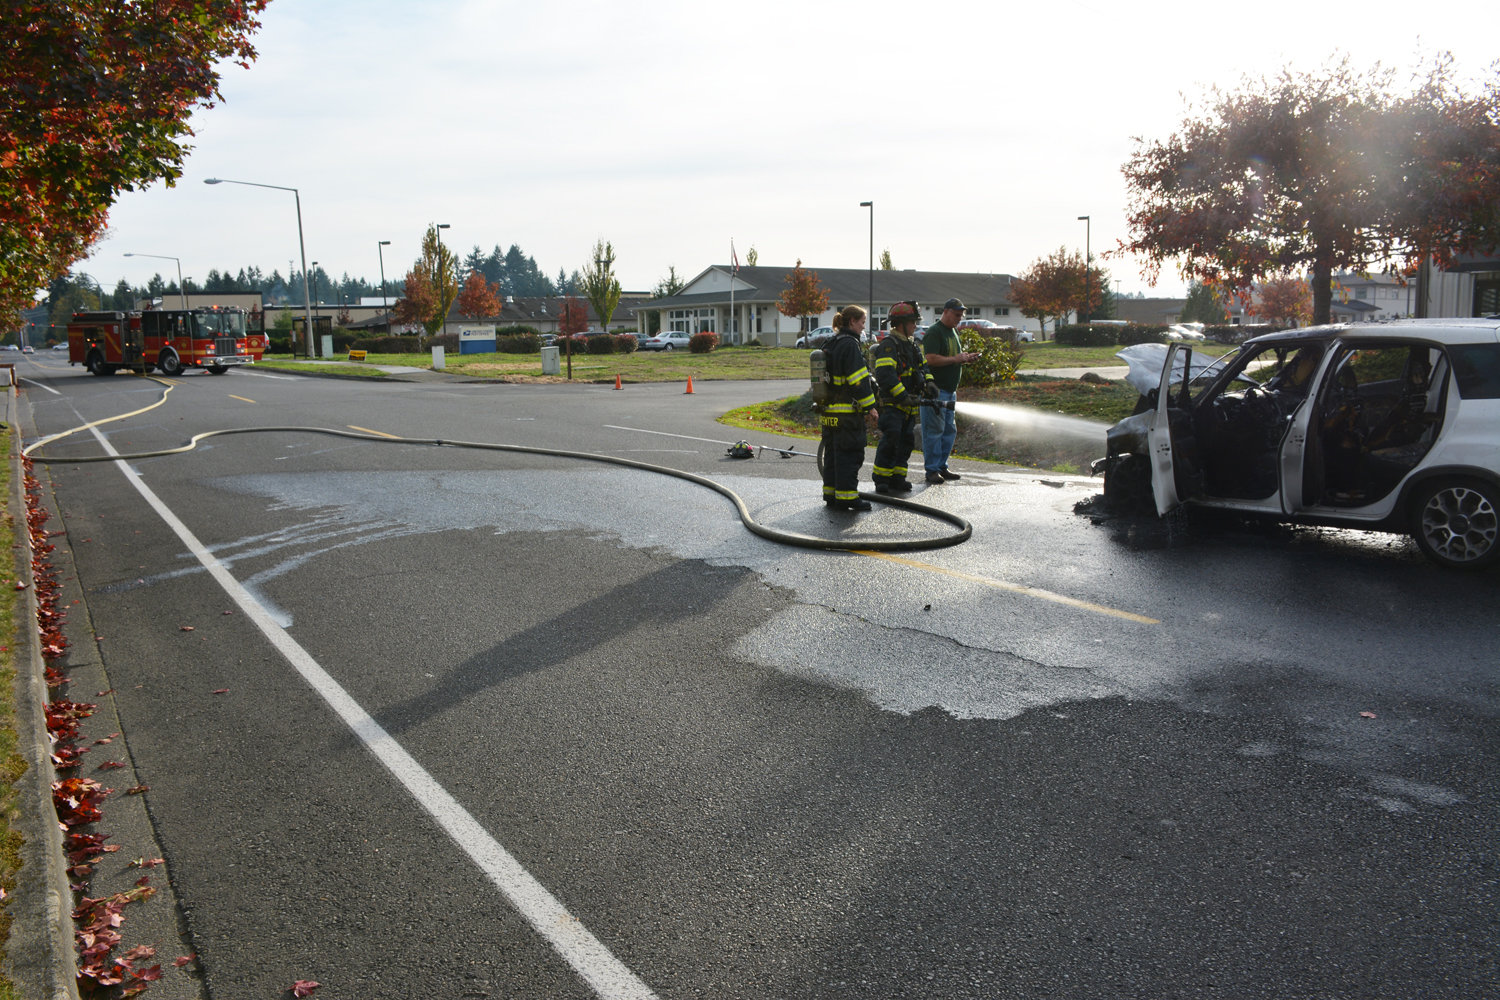 A car fire closed both lanes of traffic on Creek Street near the Yelm Post Office on Thursday.